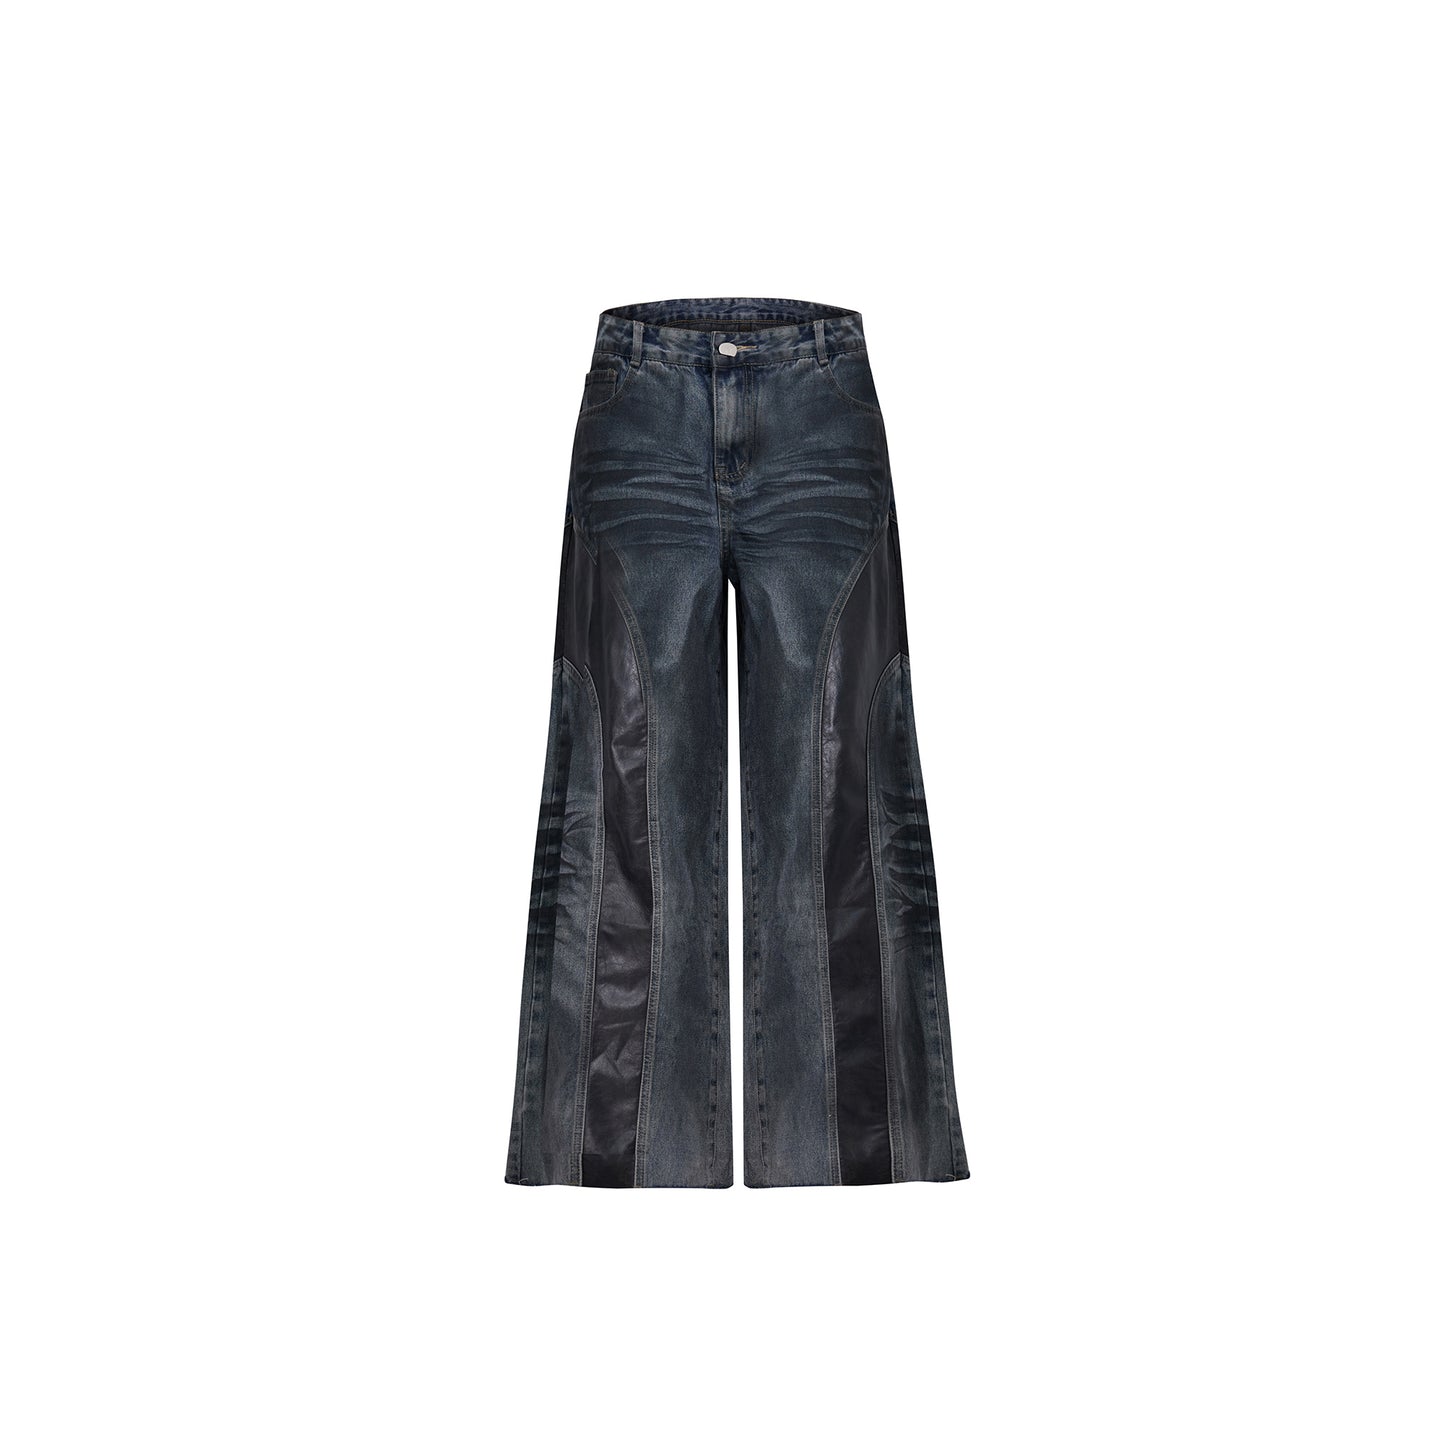 【24s April.】Distressed PU Leather Patchwork Jeans